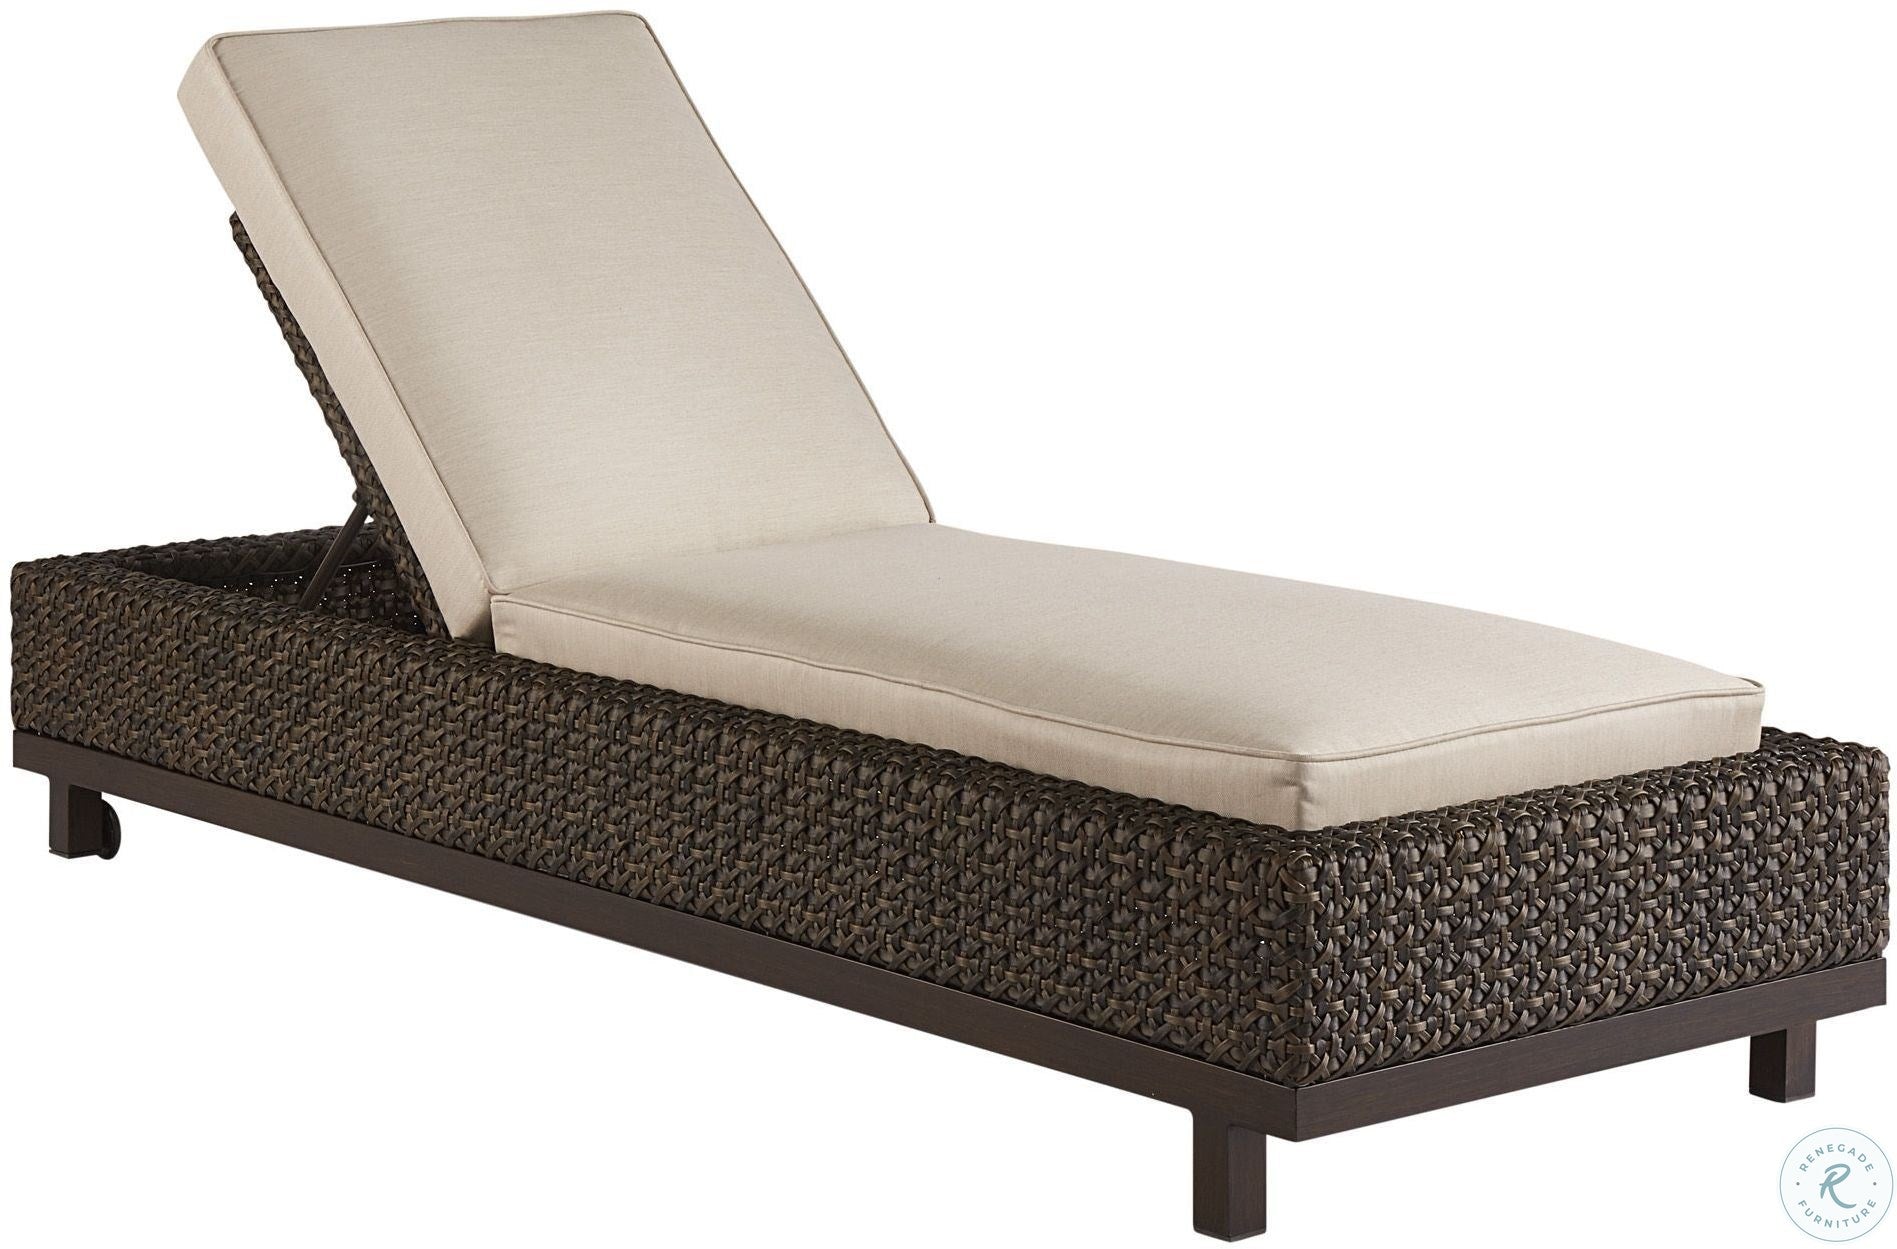 A.R.T. Furniture Brentwood Outdoor Wicker Chaise Lounge  #SA862